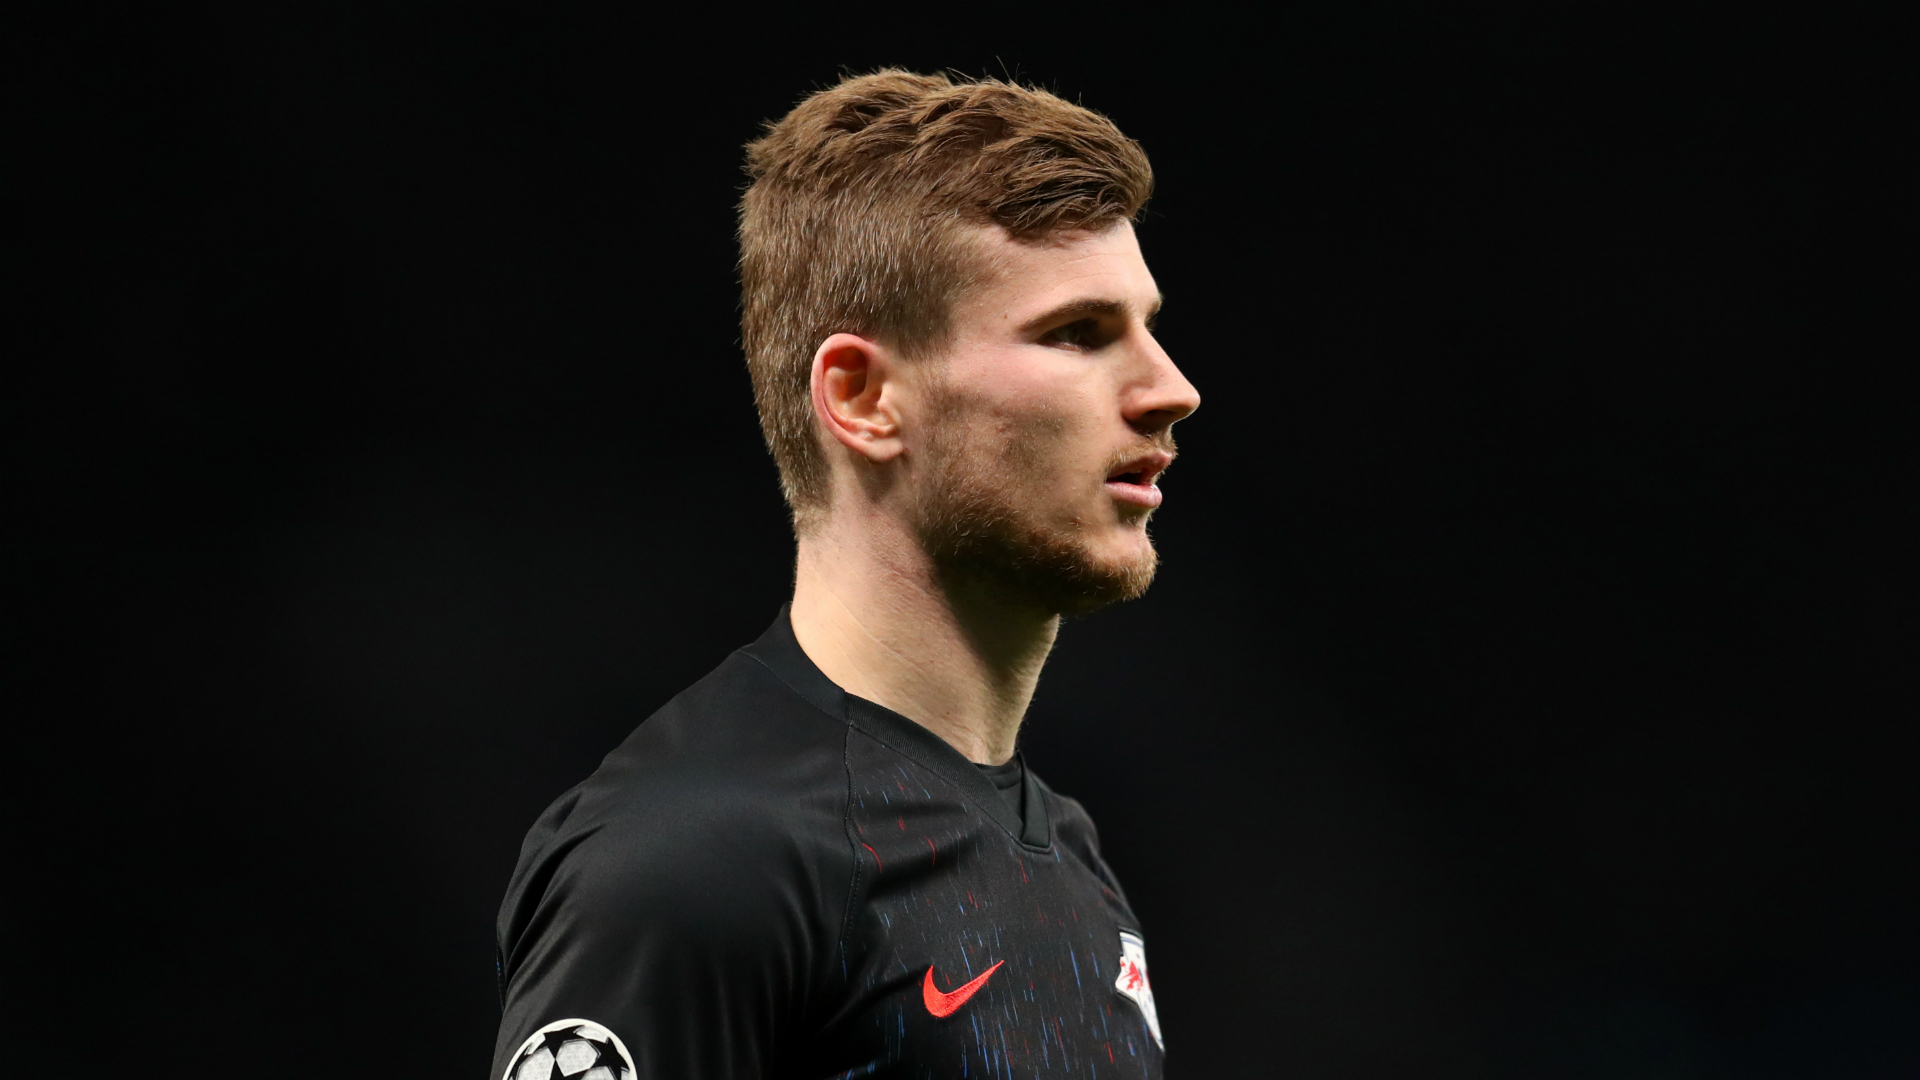 Timo Werner is linked with Liverpool, but RB Leipzig CEO Oliver Mintzlaff has no plans to drop the forward's price.